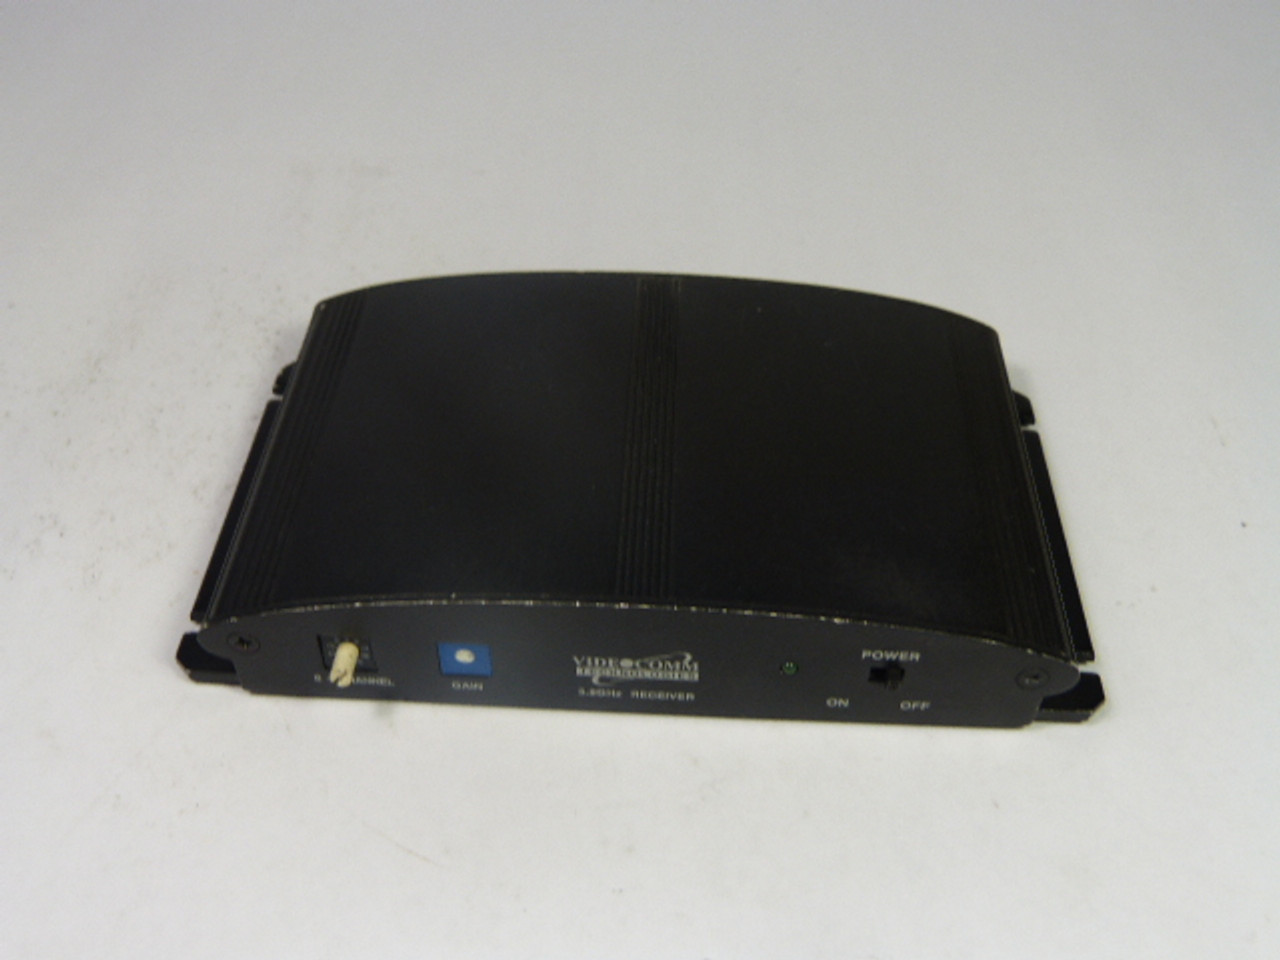 Videocomm RX-5808 Desktop Receiver W/O Cables USED